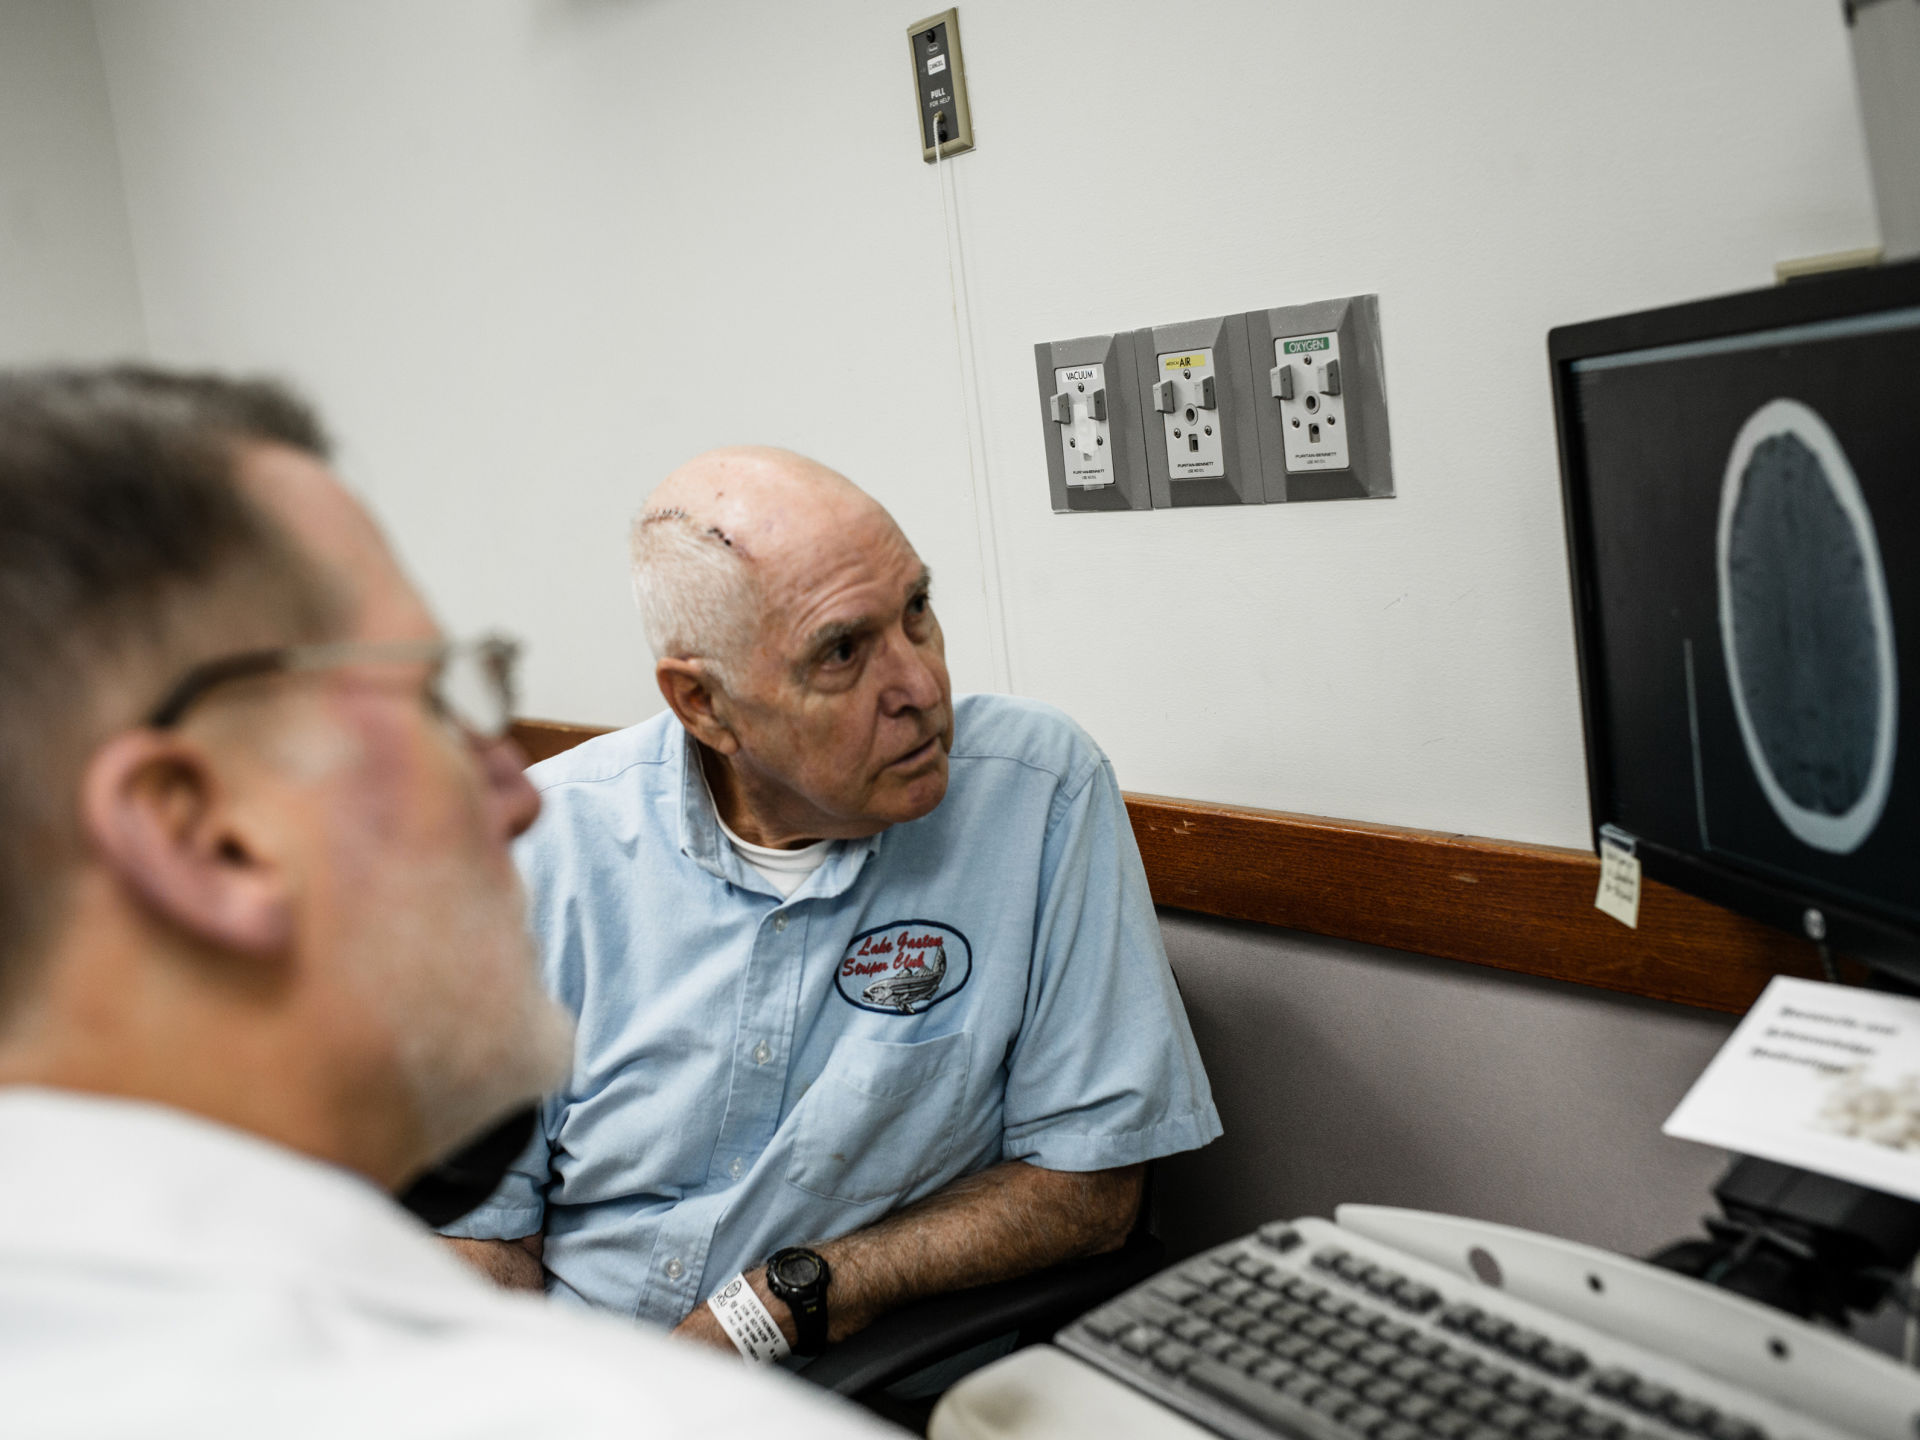 Tom Feild looks at a brain scan with his doctor at Virginia Commonwealth University Medical Center in Richmond, Va. Feild had brain surgery after experiencing a low-grade headache that wouldn't go away and difficulty driving.